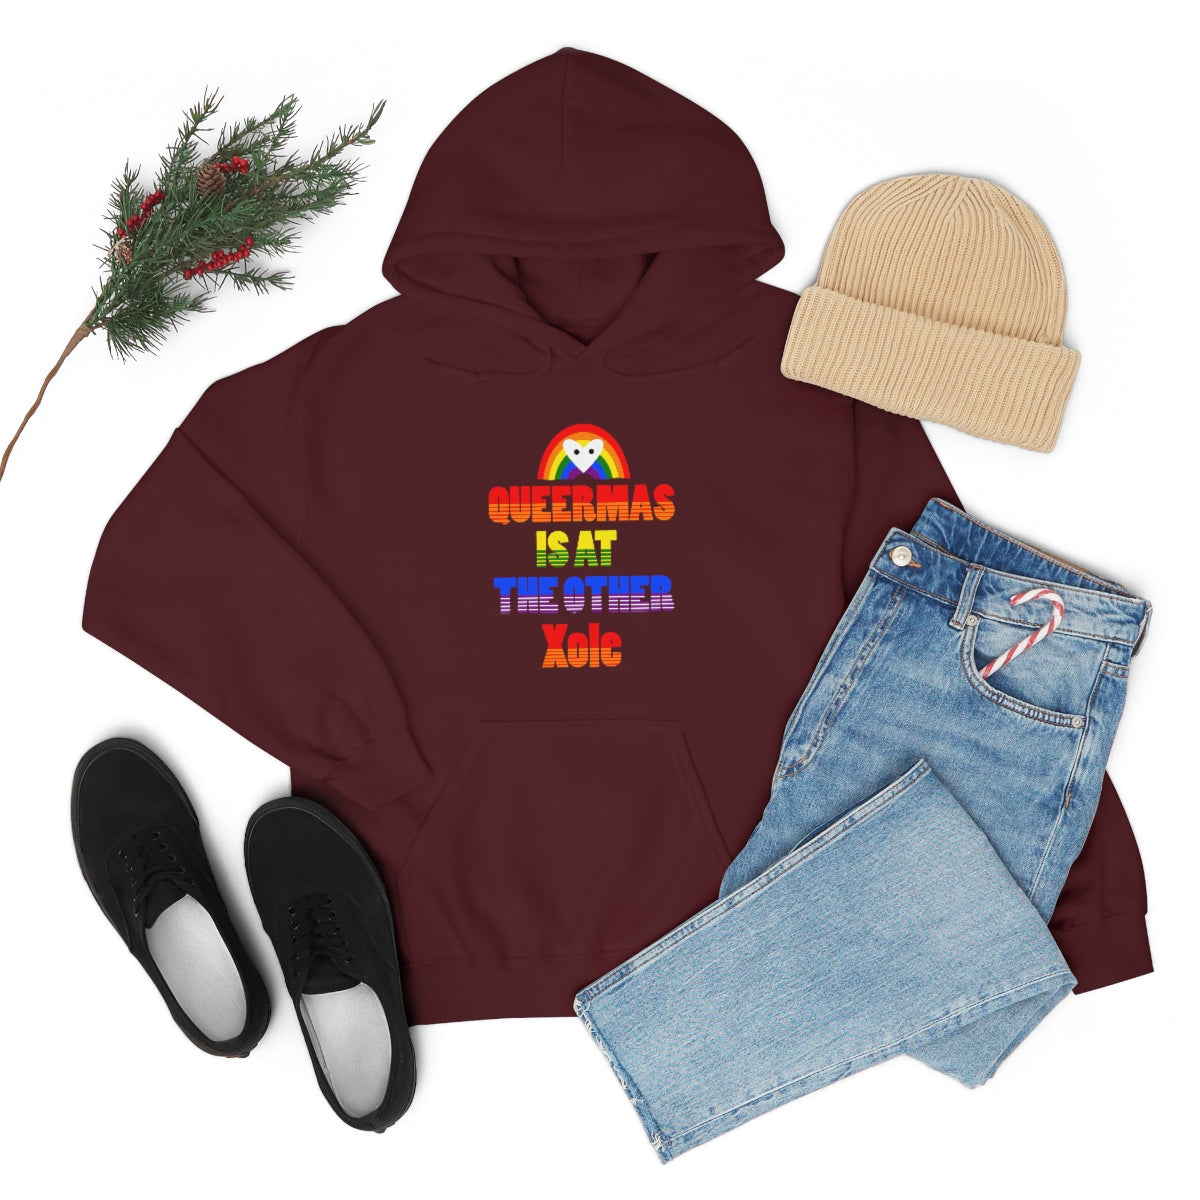 Unisex Christmas LGBTQ Heavy Blend Hoodie - Queermas Is At The Other Xole Printify